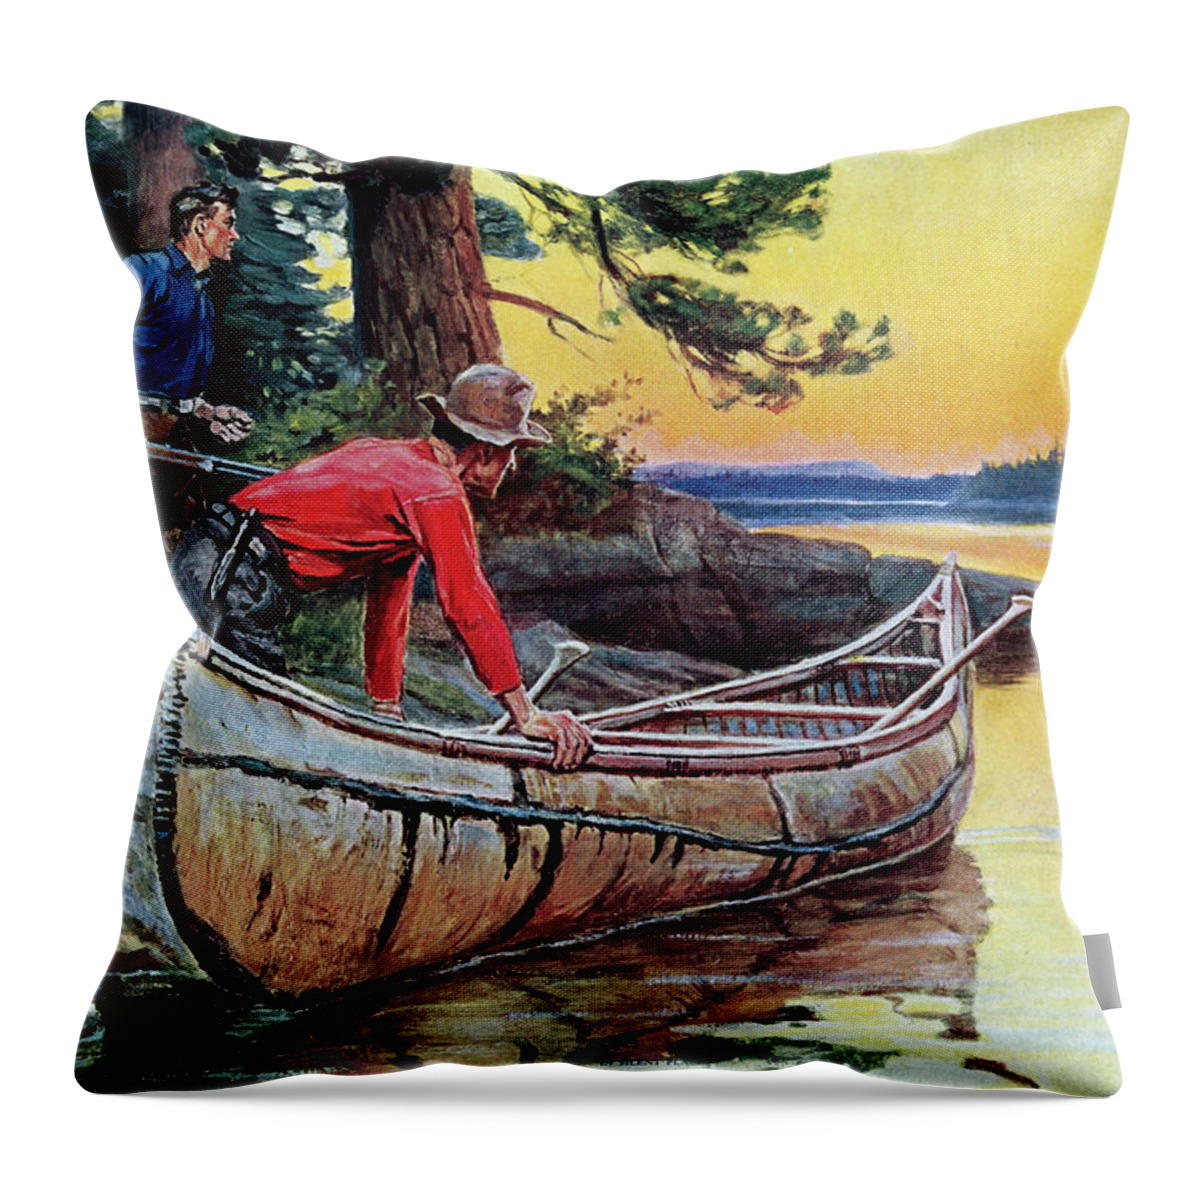 Outdoor Throw Pillow featuring the painting In Silent Places #1 by Philip R Goodwin